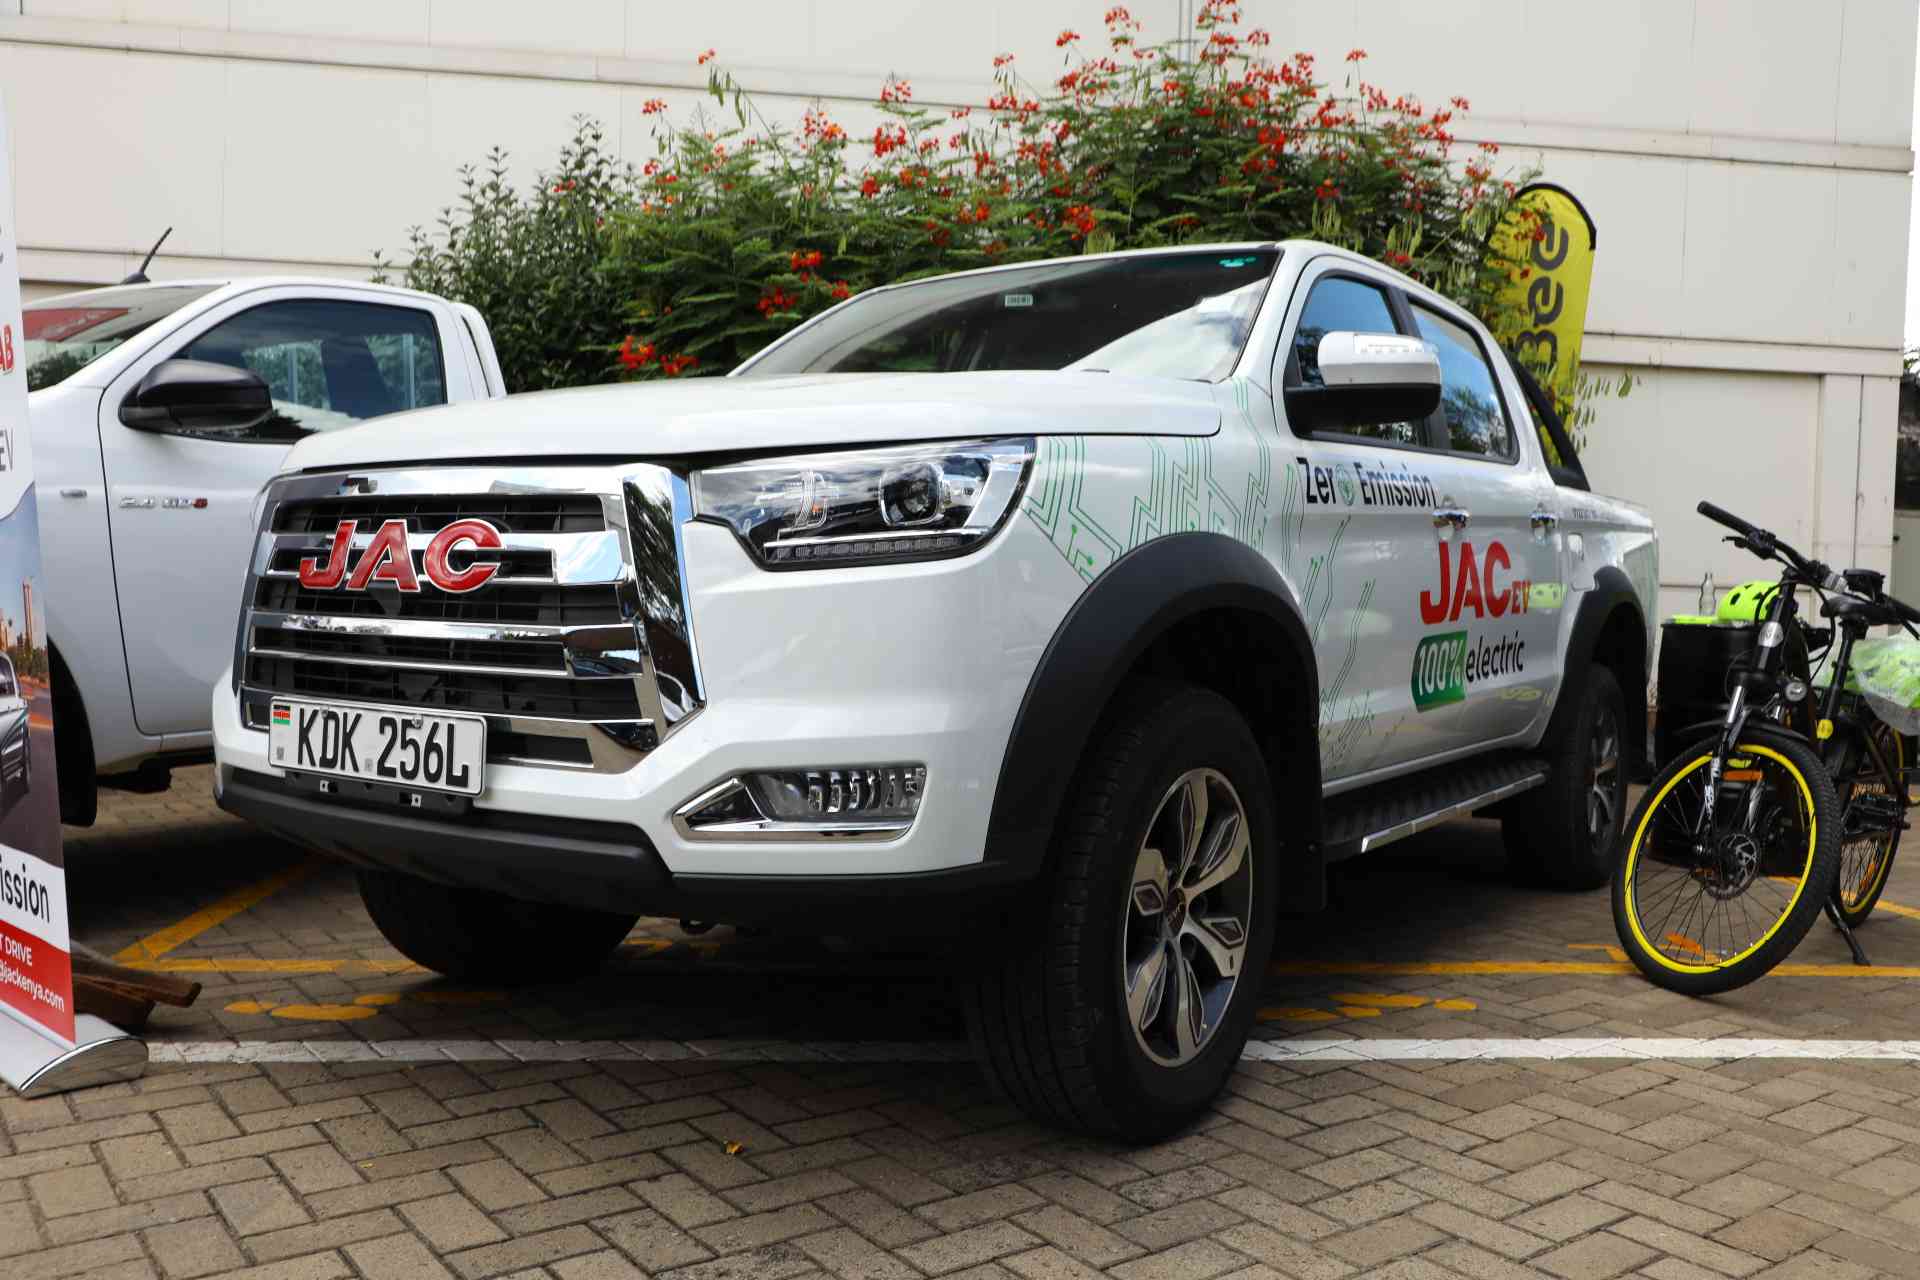 The JAC Electric Pick Up